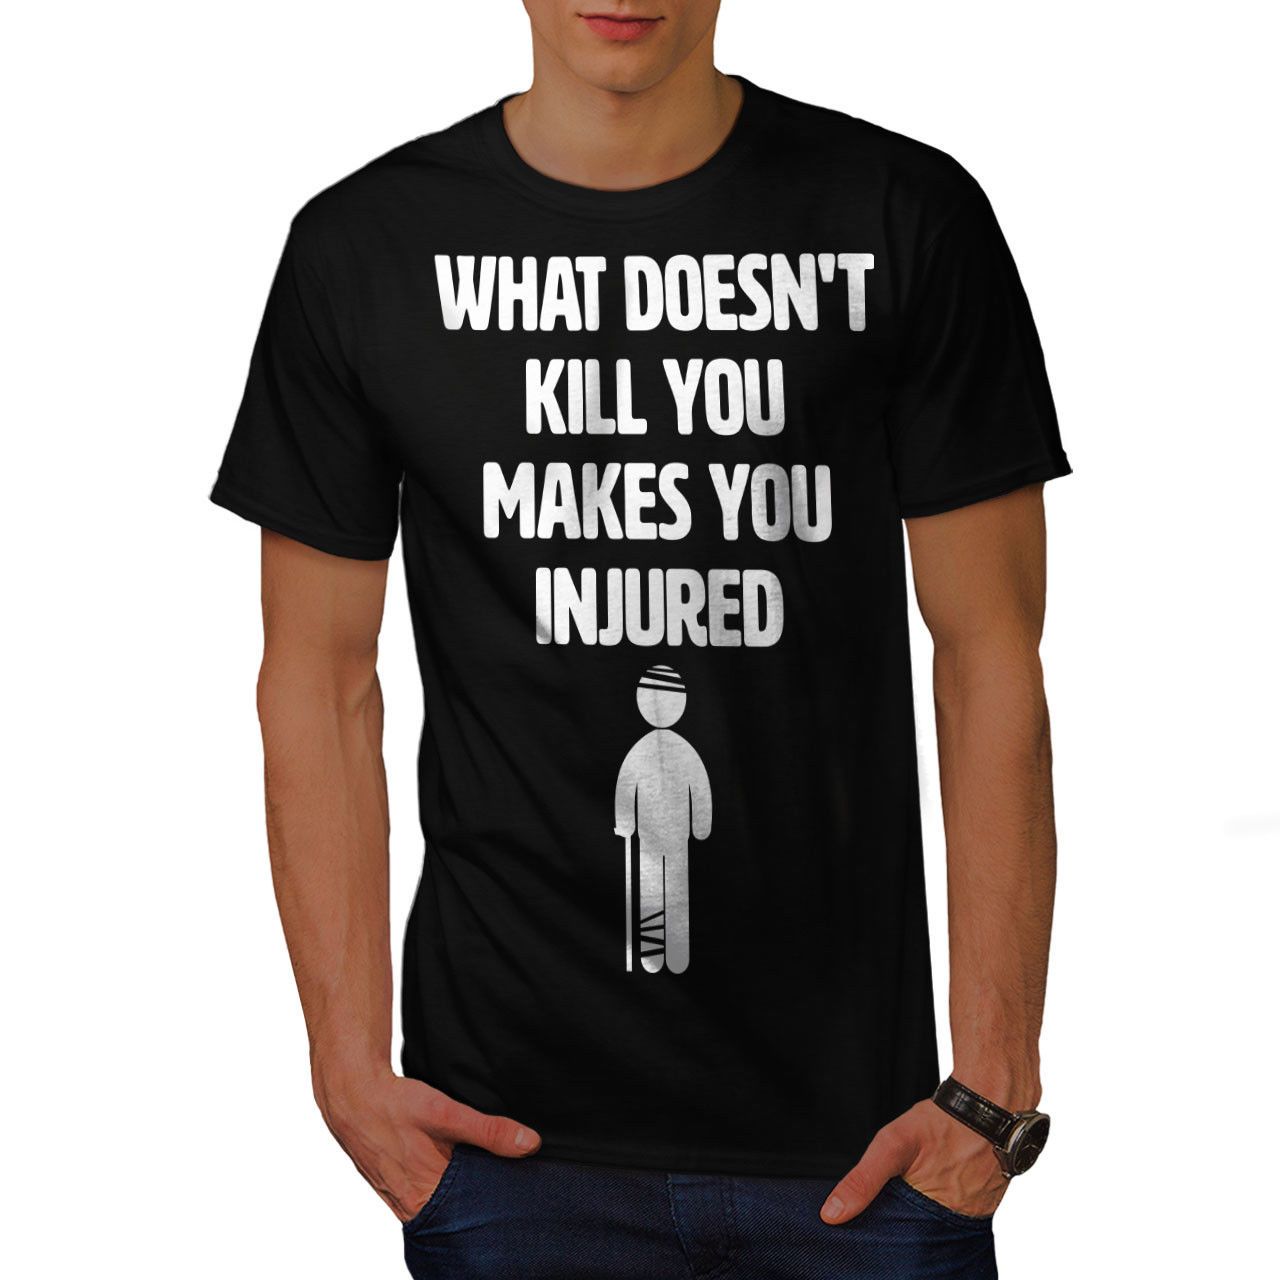 Kill You Injured Funny Mens T Shirt, Get Graphic Design Printed Tee ...